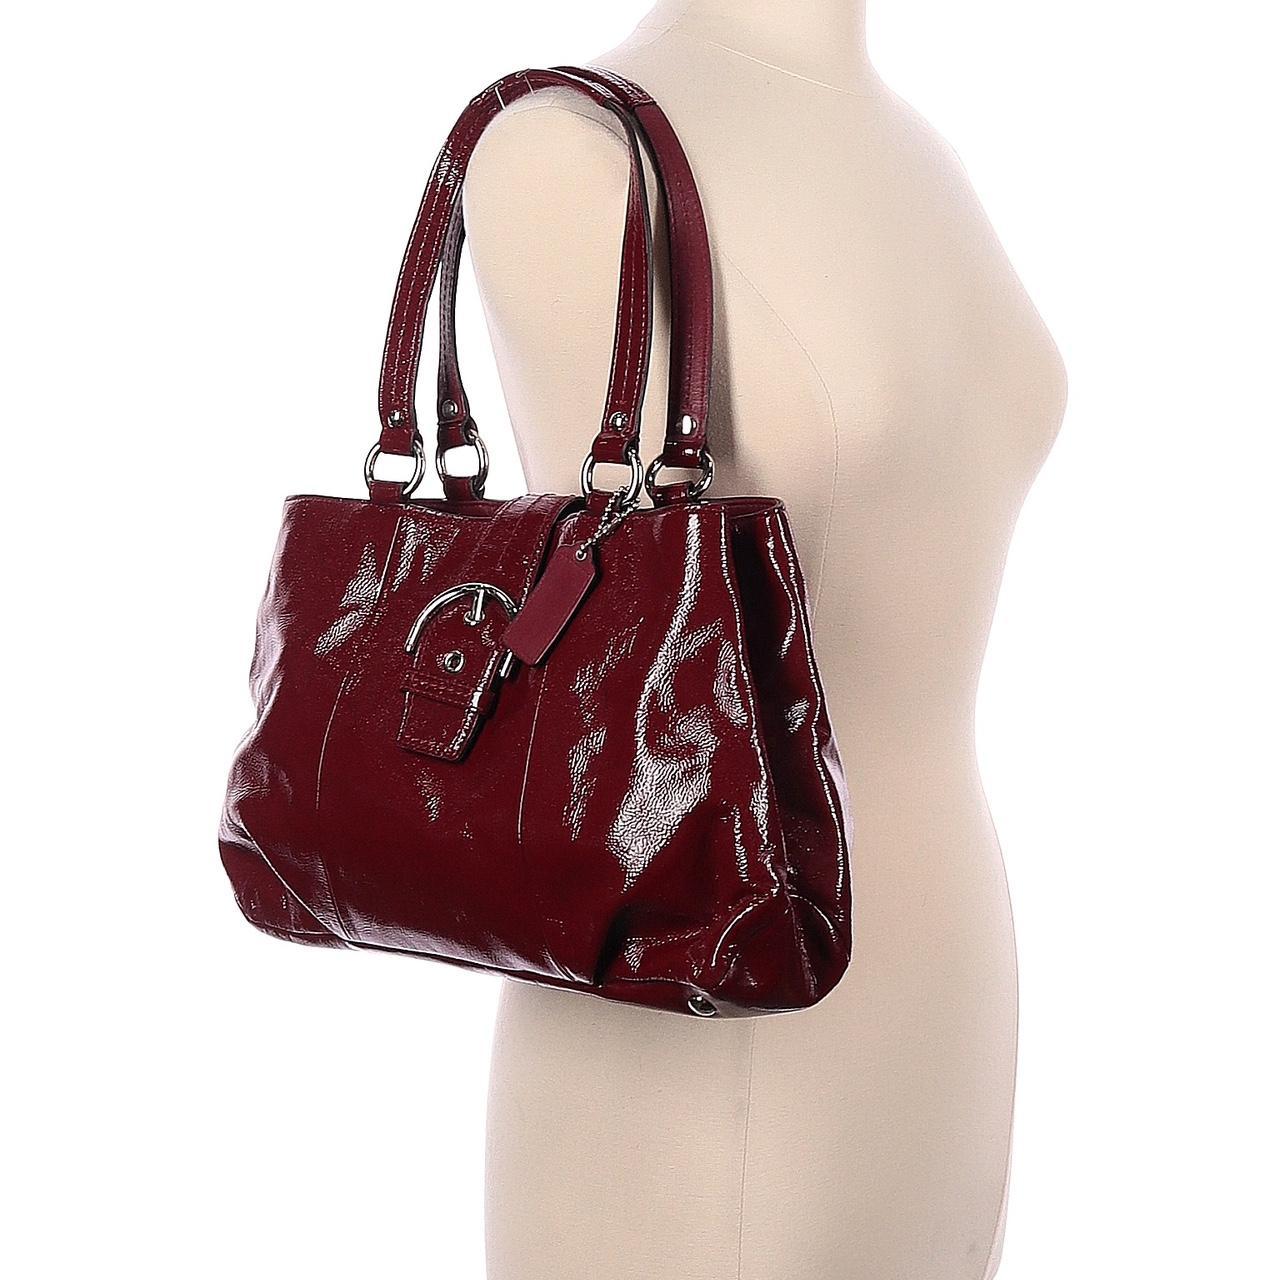 Coach F19711 - Burgundy Red Patent Leather Soho Buckle Carryall Tote